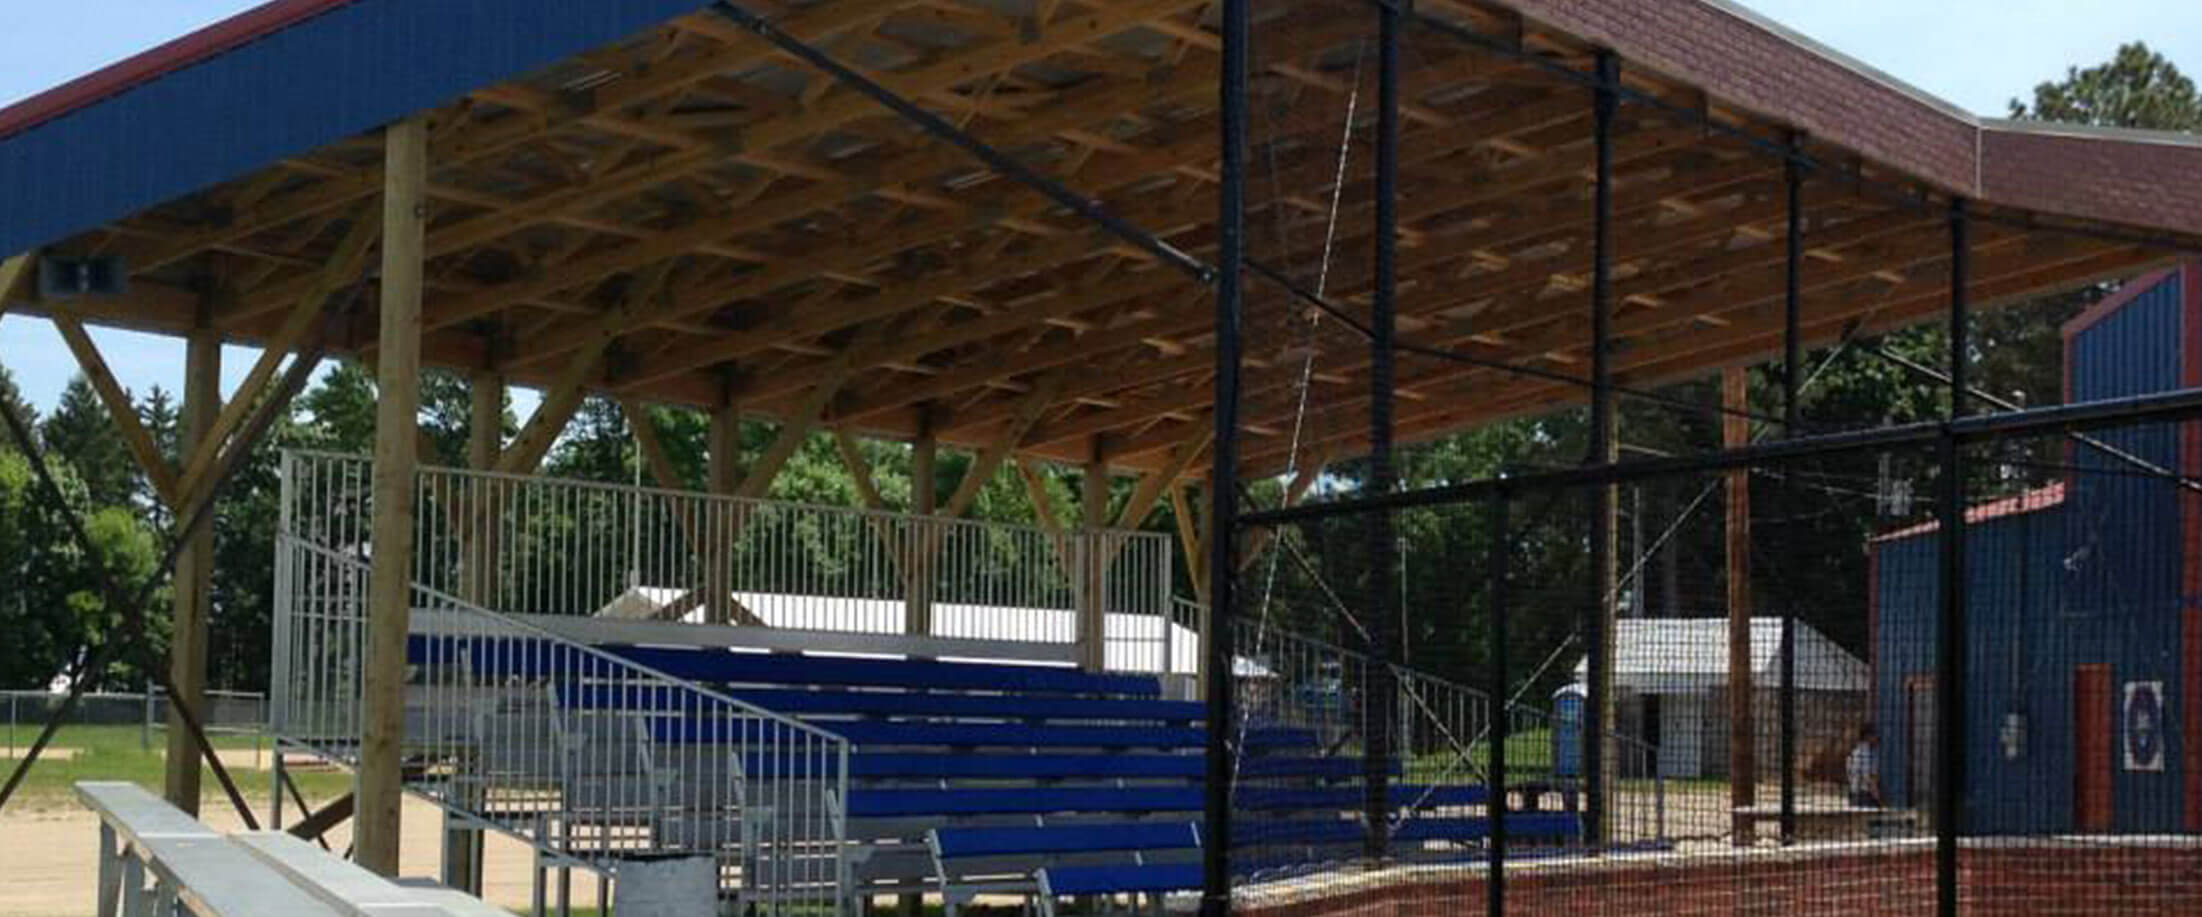 Baseball stands and overhead awning built using materials supplied by Lifestyle Lumber